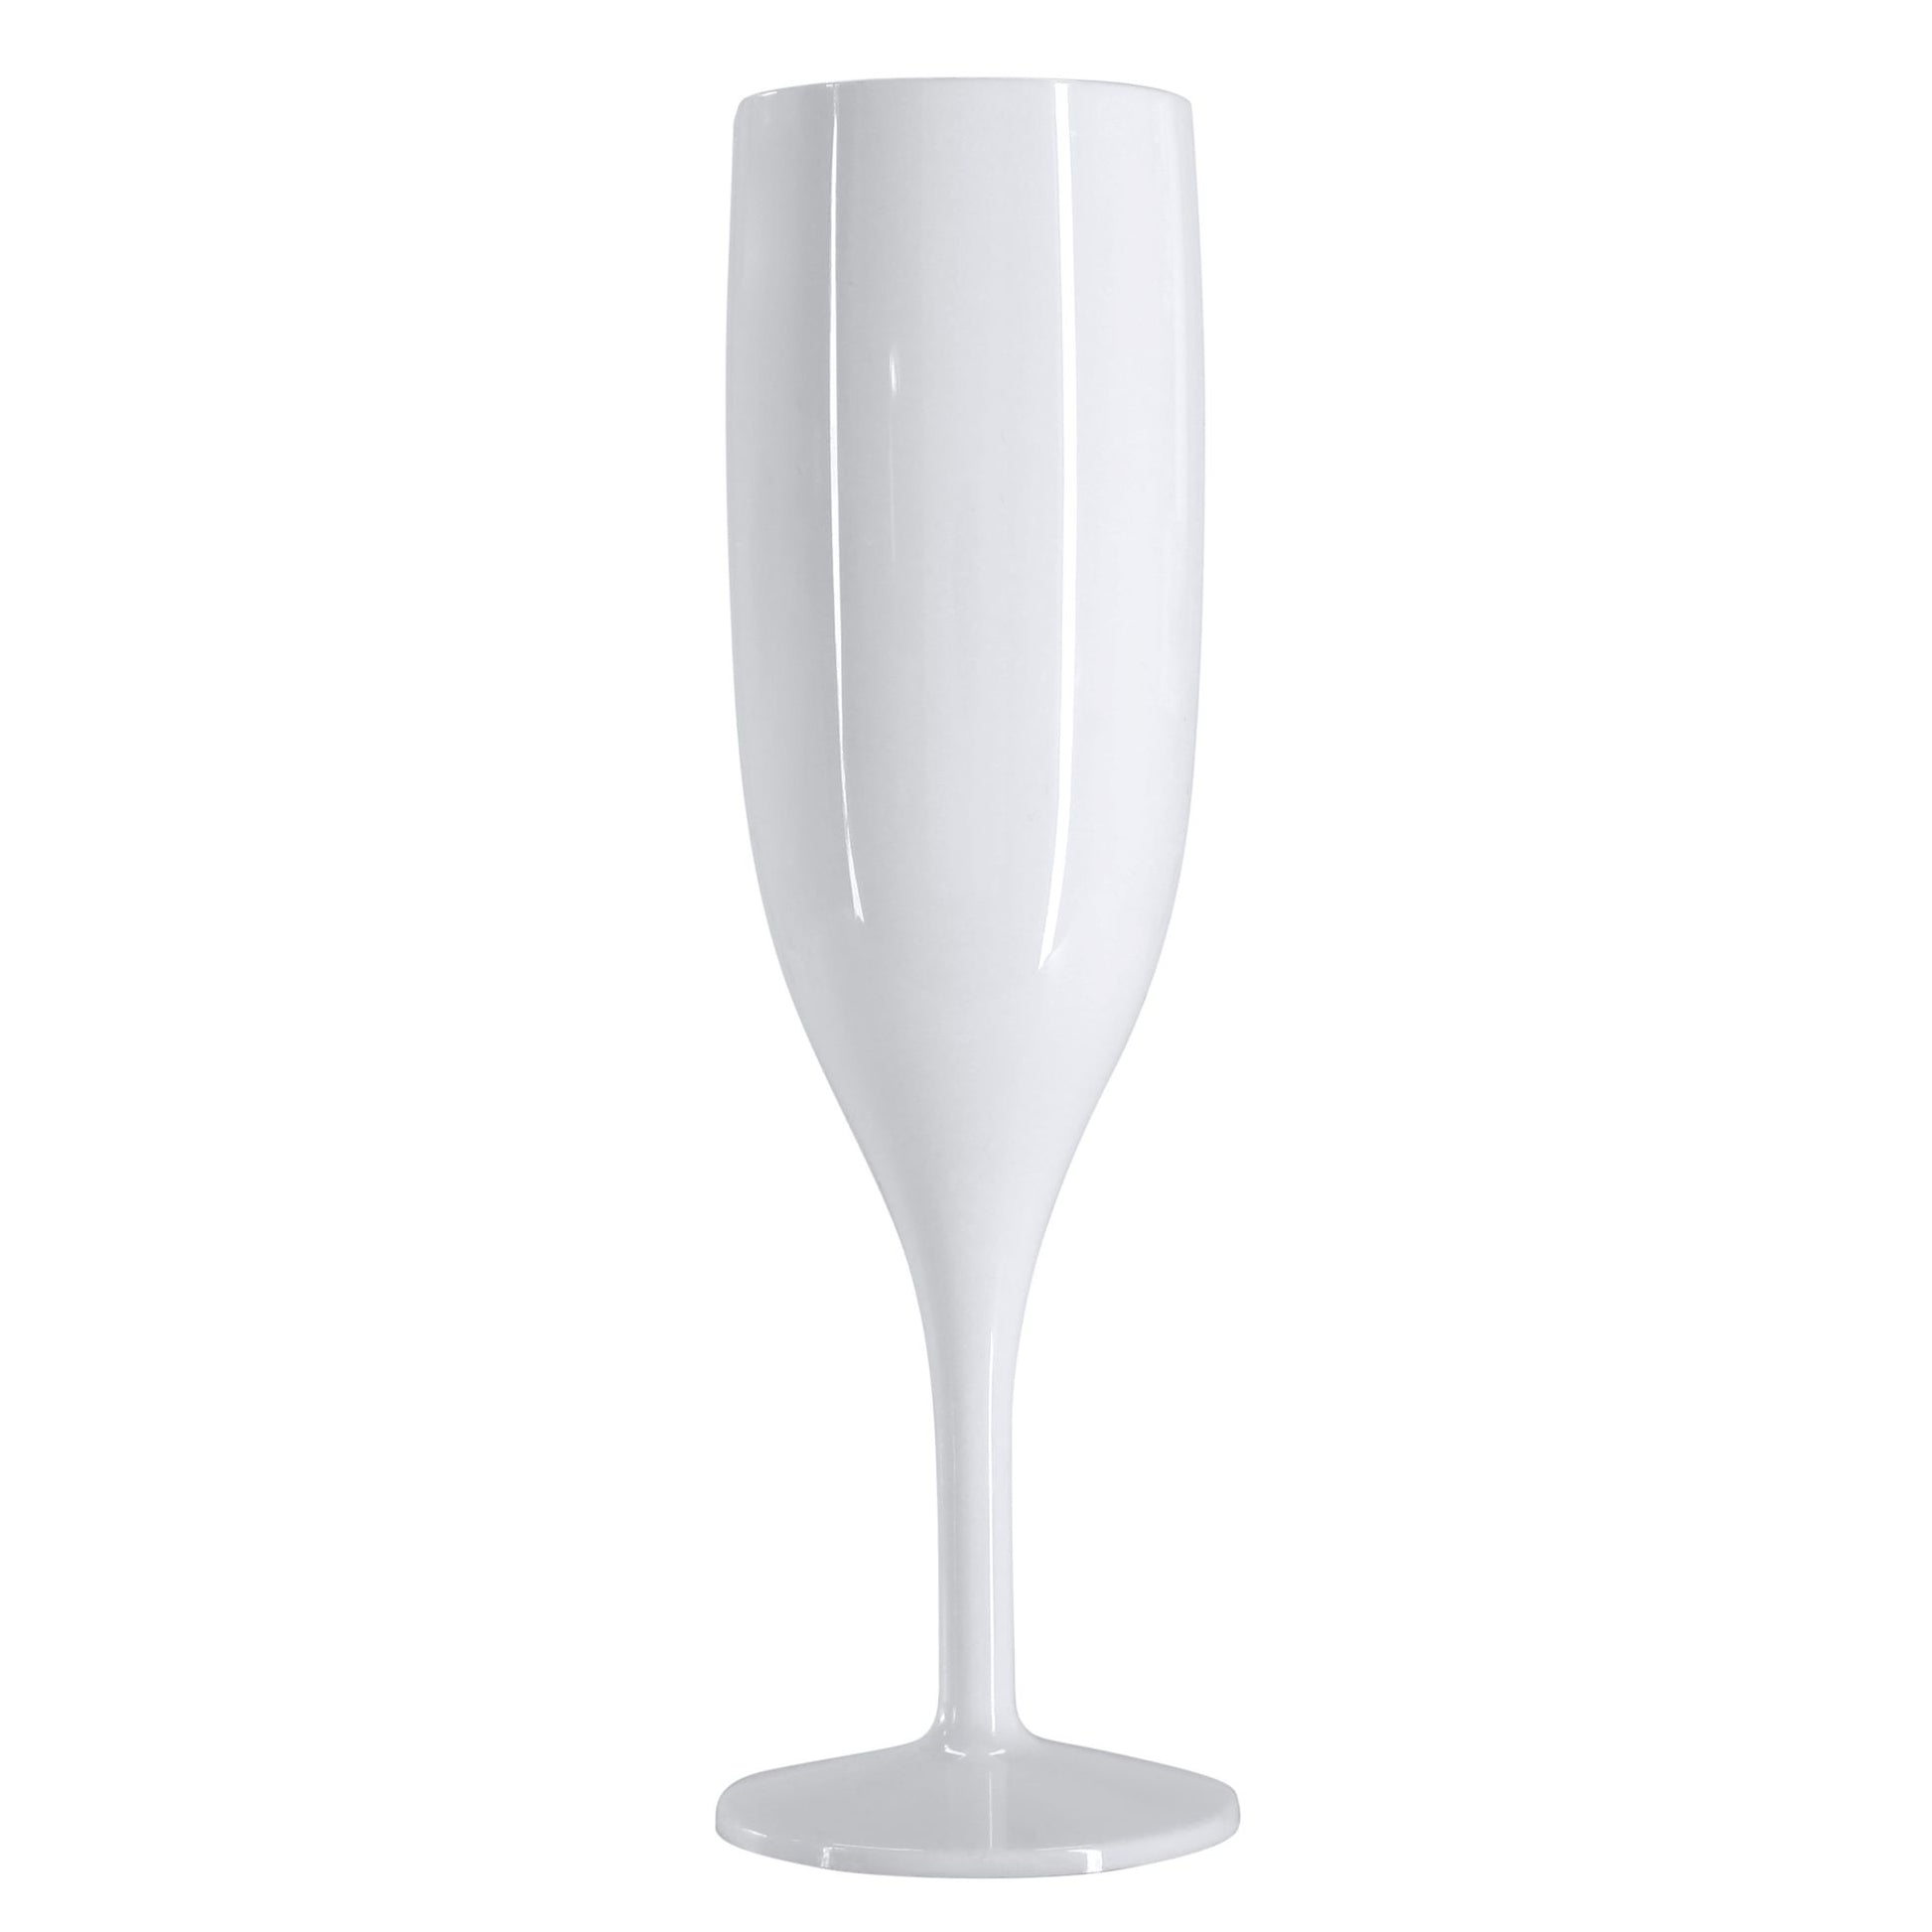 48 Flutes, 48 Wine Glasses (White) Pack of 96 Reusable Plastic Champagne Prosecco 175ml 300ml Strong Glossy Bright 1-Piece Dishwasher Safe-5056020186328-EY-PP-087-Product Pro-Flutes, White, White Champagne Glasses, White Prosecco Flutes, White Wine Glasses, Wine Glasses